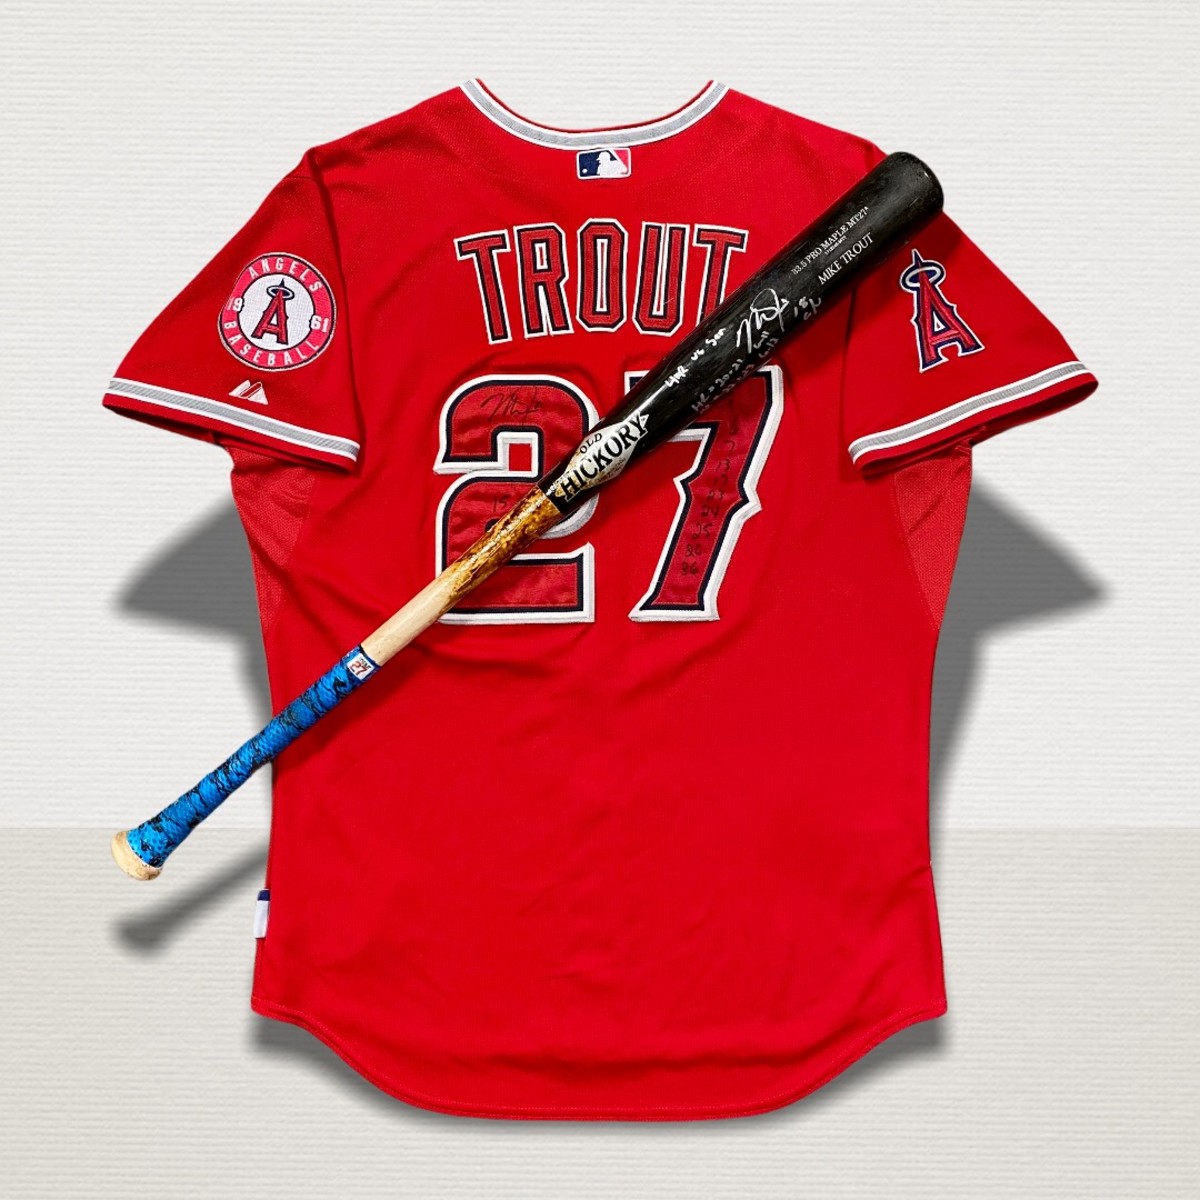 Mike Trout - Old Hickory x Nike Baseball at full draw with